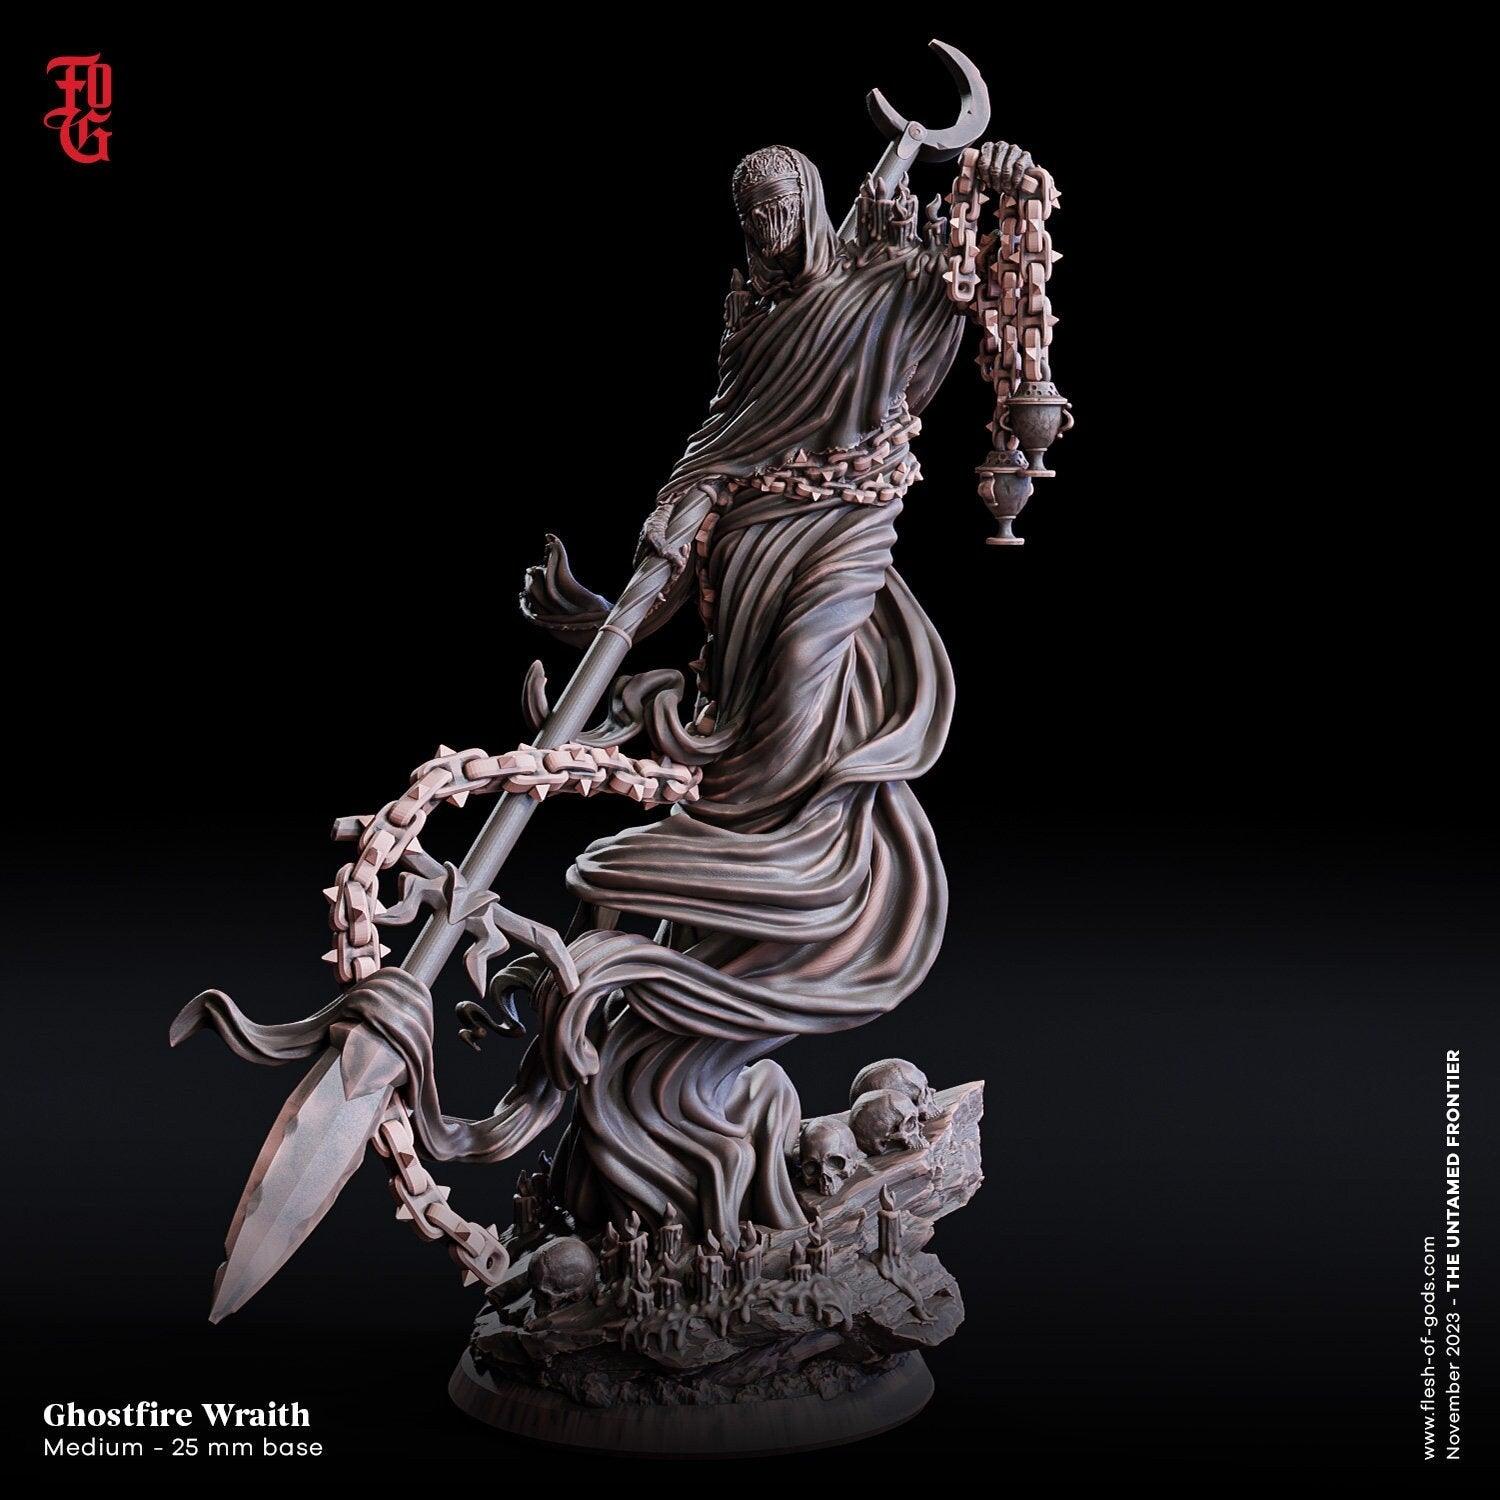 Ghostfire Wraith Miniature | Undead Specter of the Wild West for DnD 5e| 32mm Scale - Plague Miniatures shop for DnD Miniatures